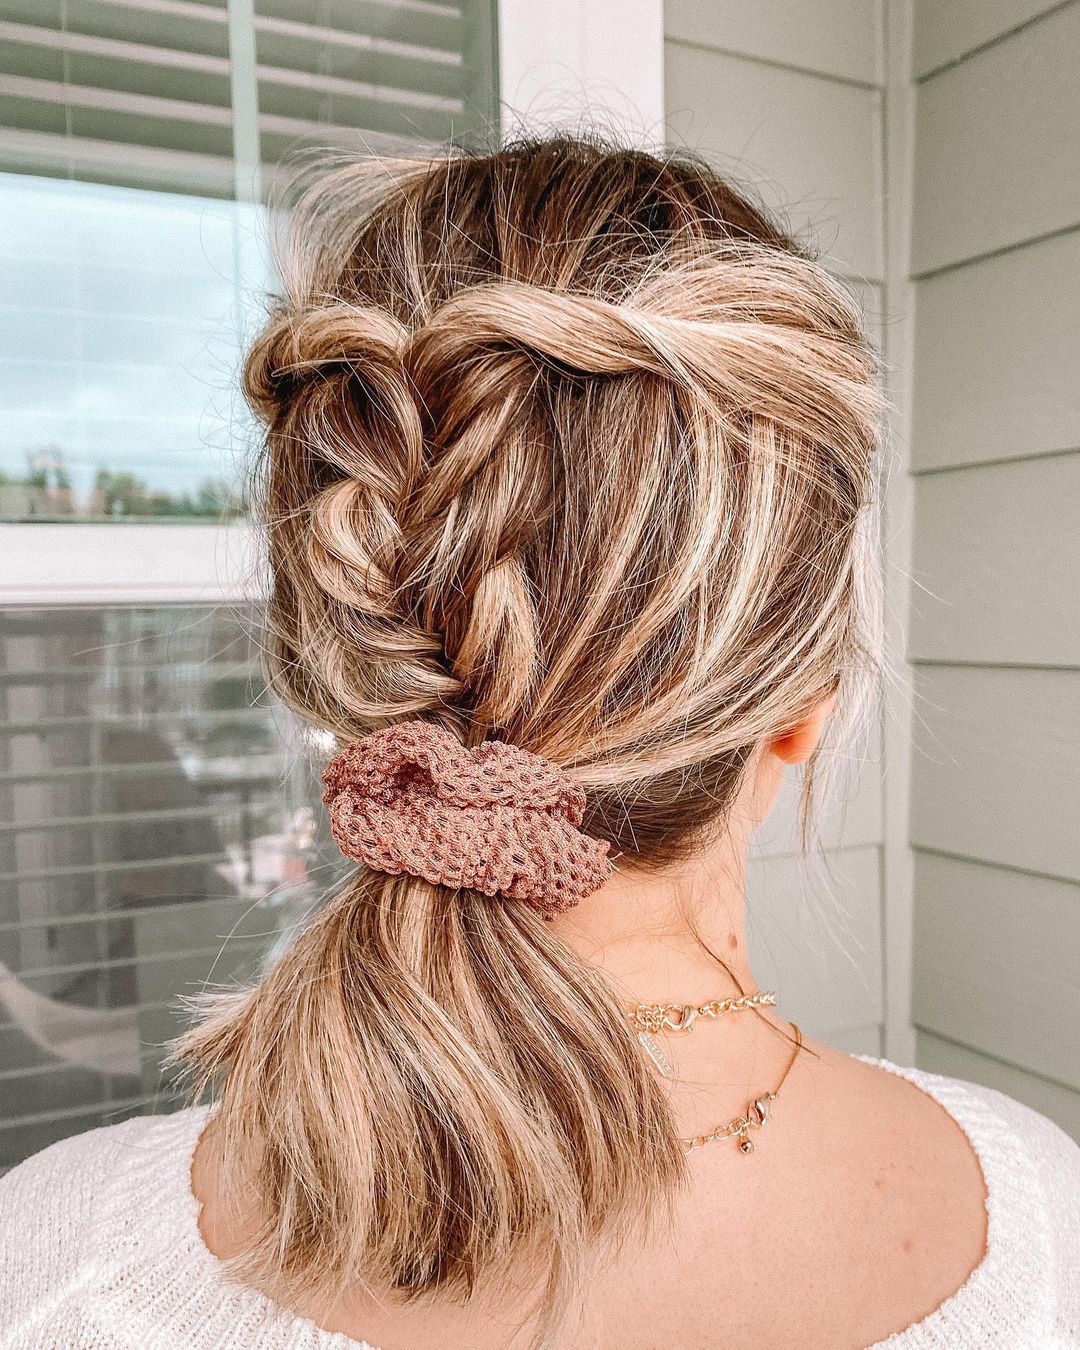 braided hairstyle with a scrunchie